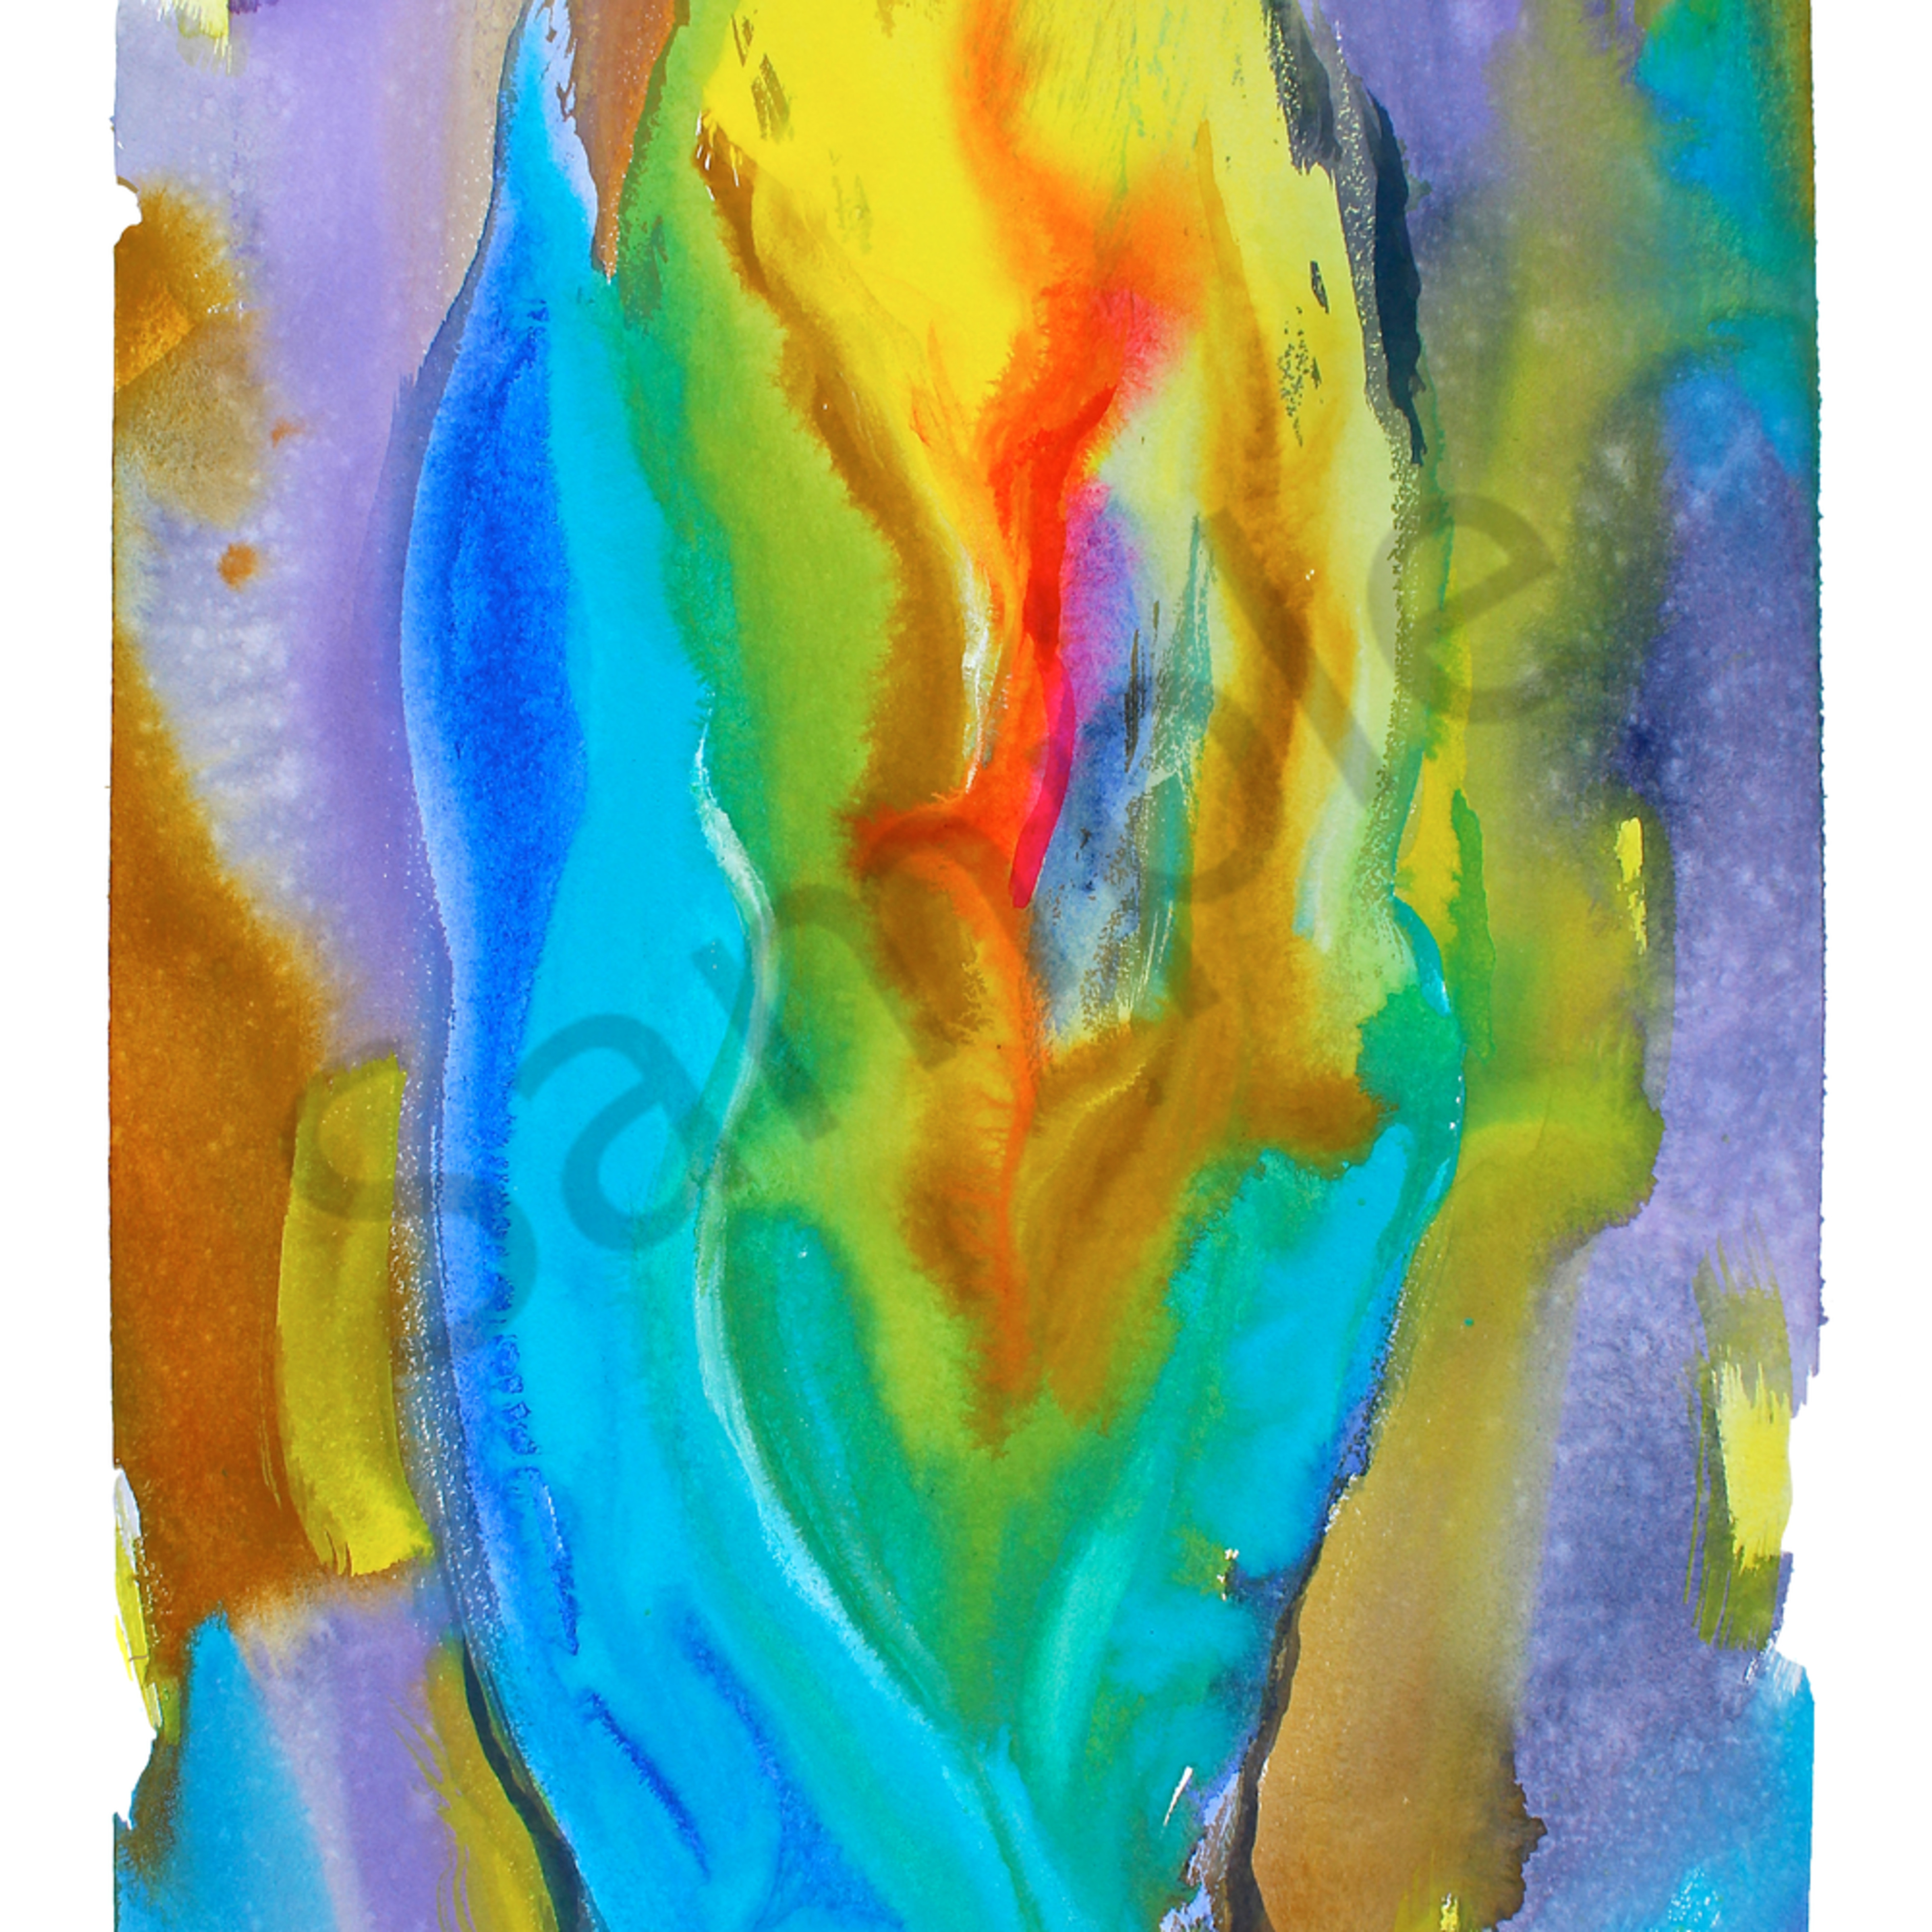 abstract art original watercolor painting 8x8 inch on acid free hot pressed watercolor paper .